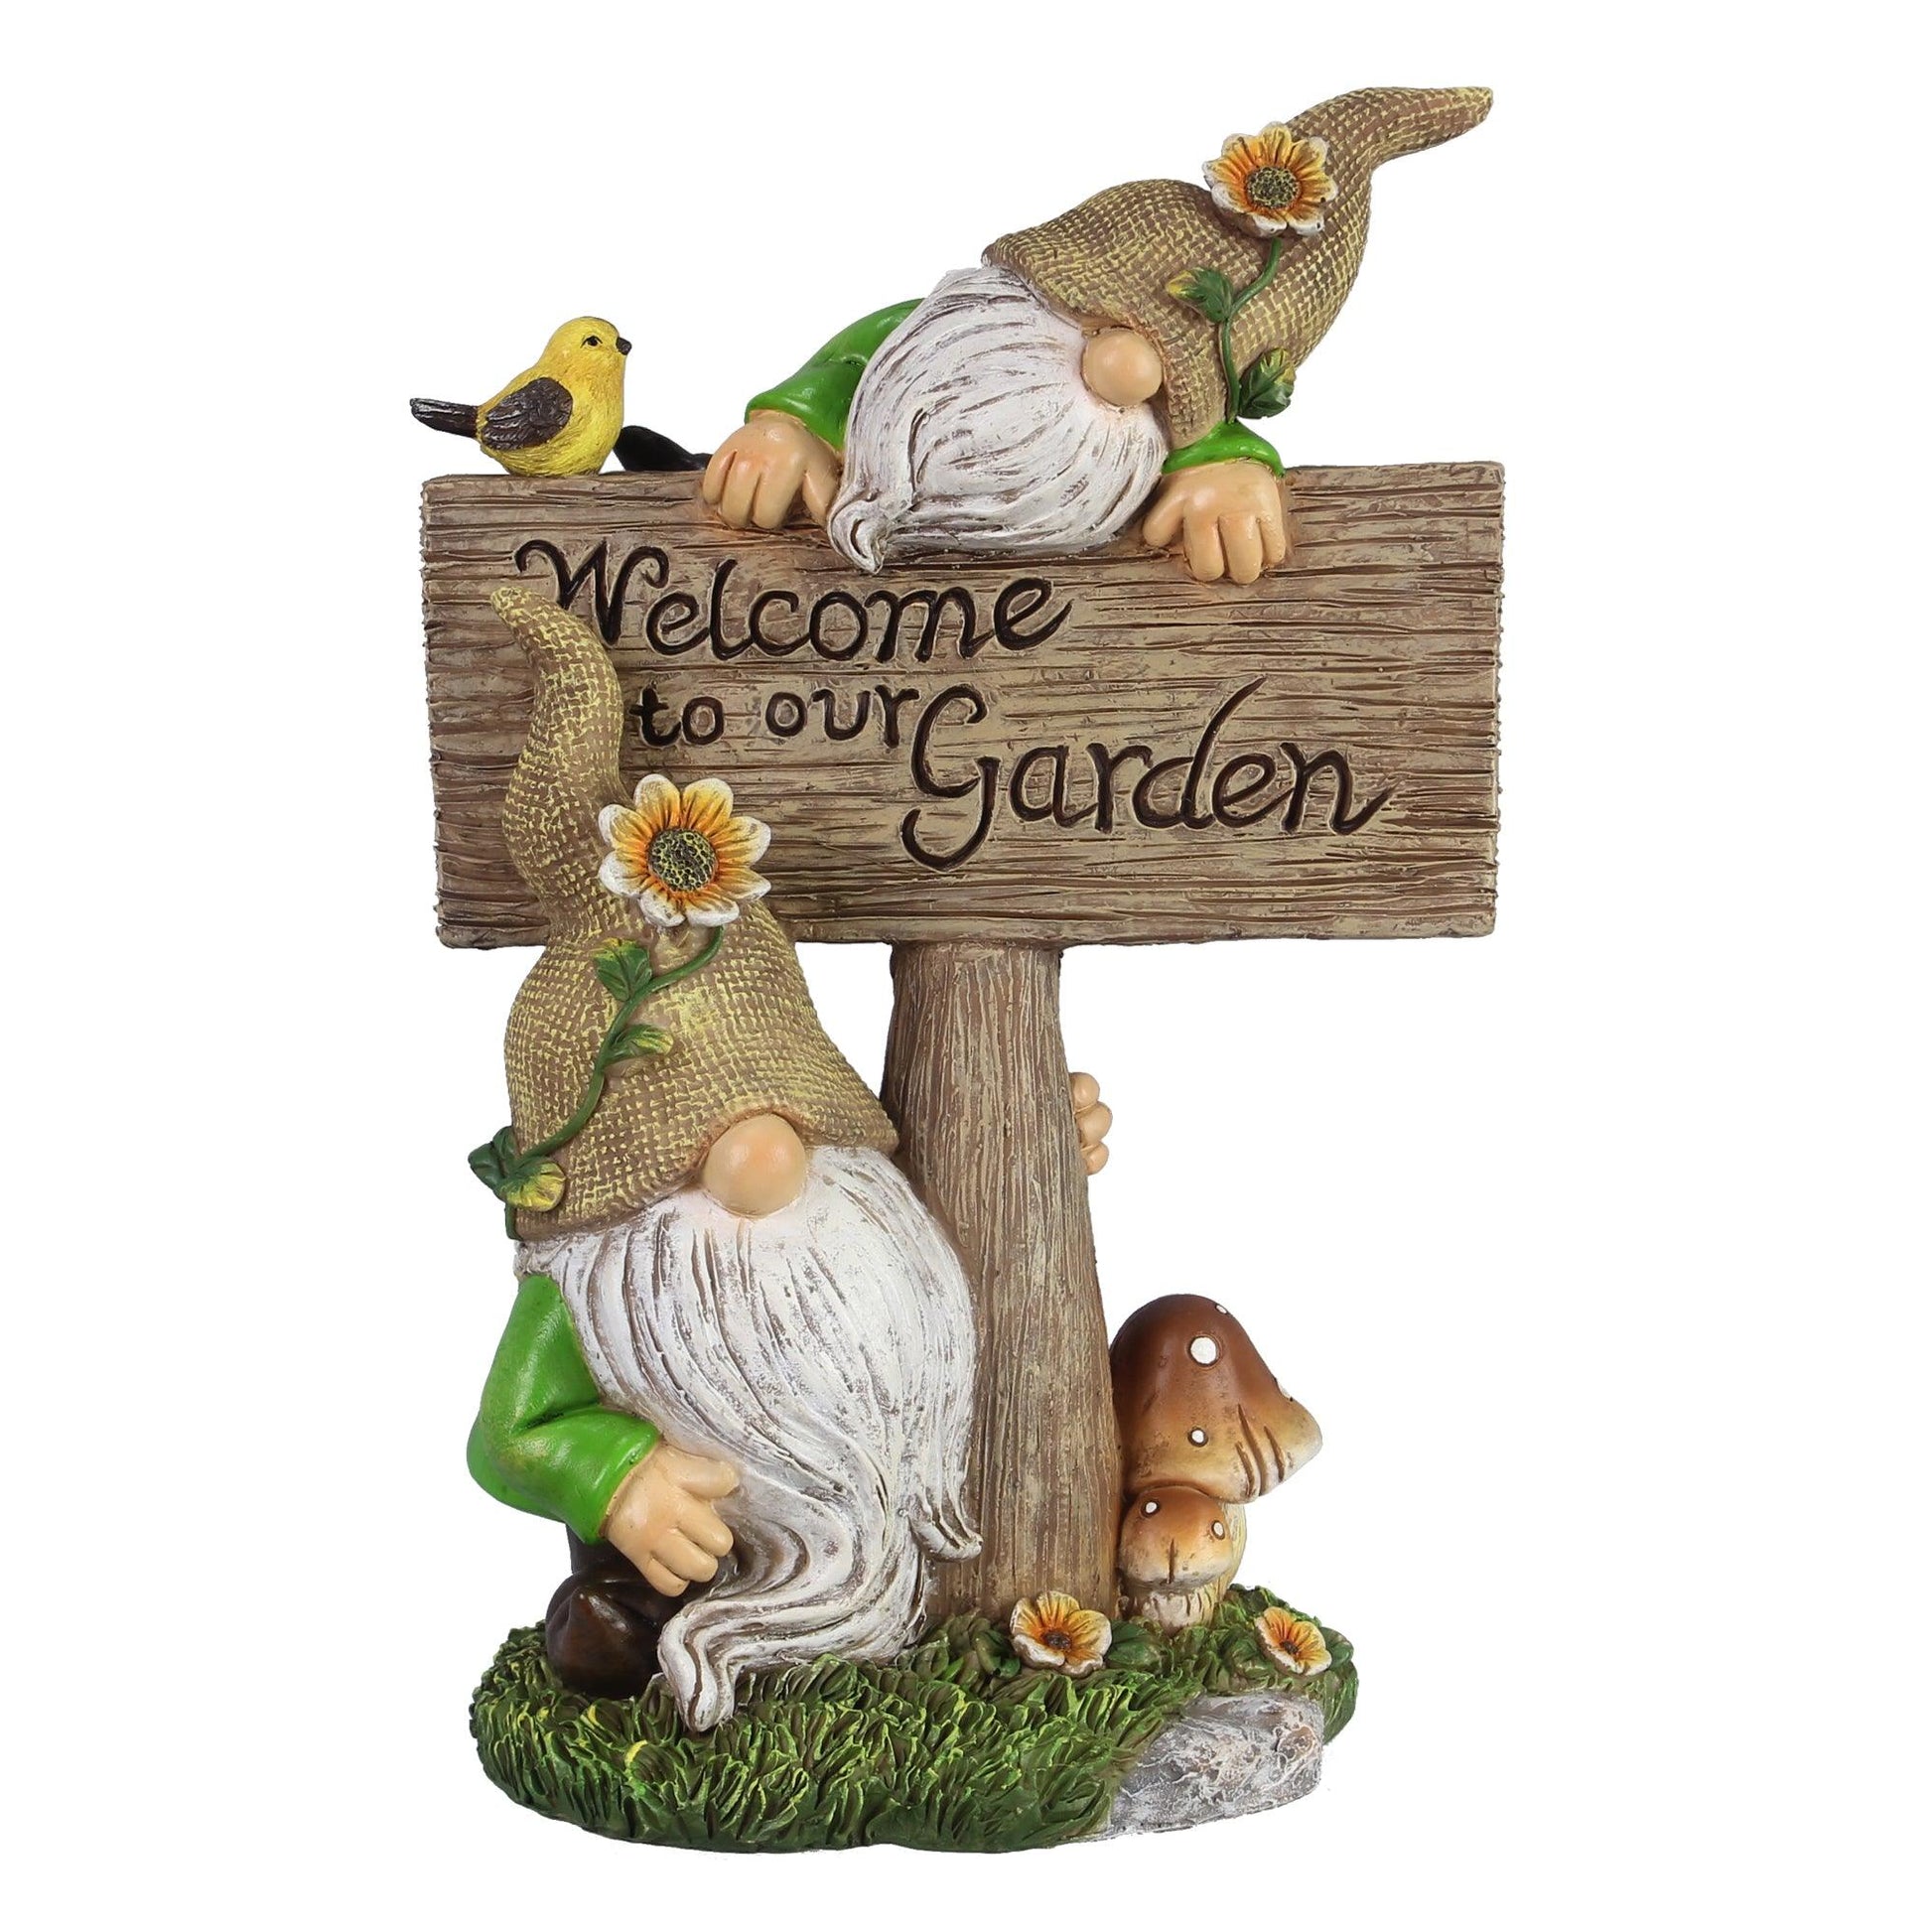 Welcoming Gnomes Sculpture - Wild Wings